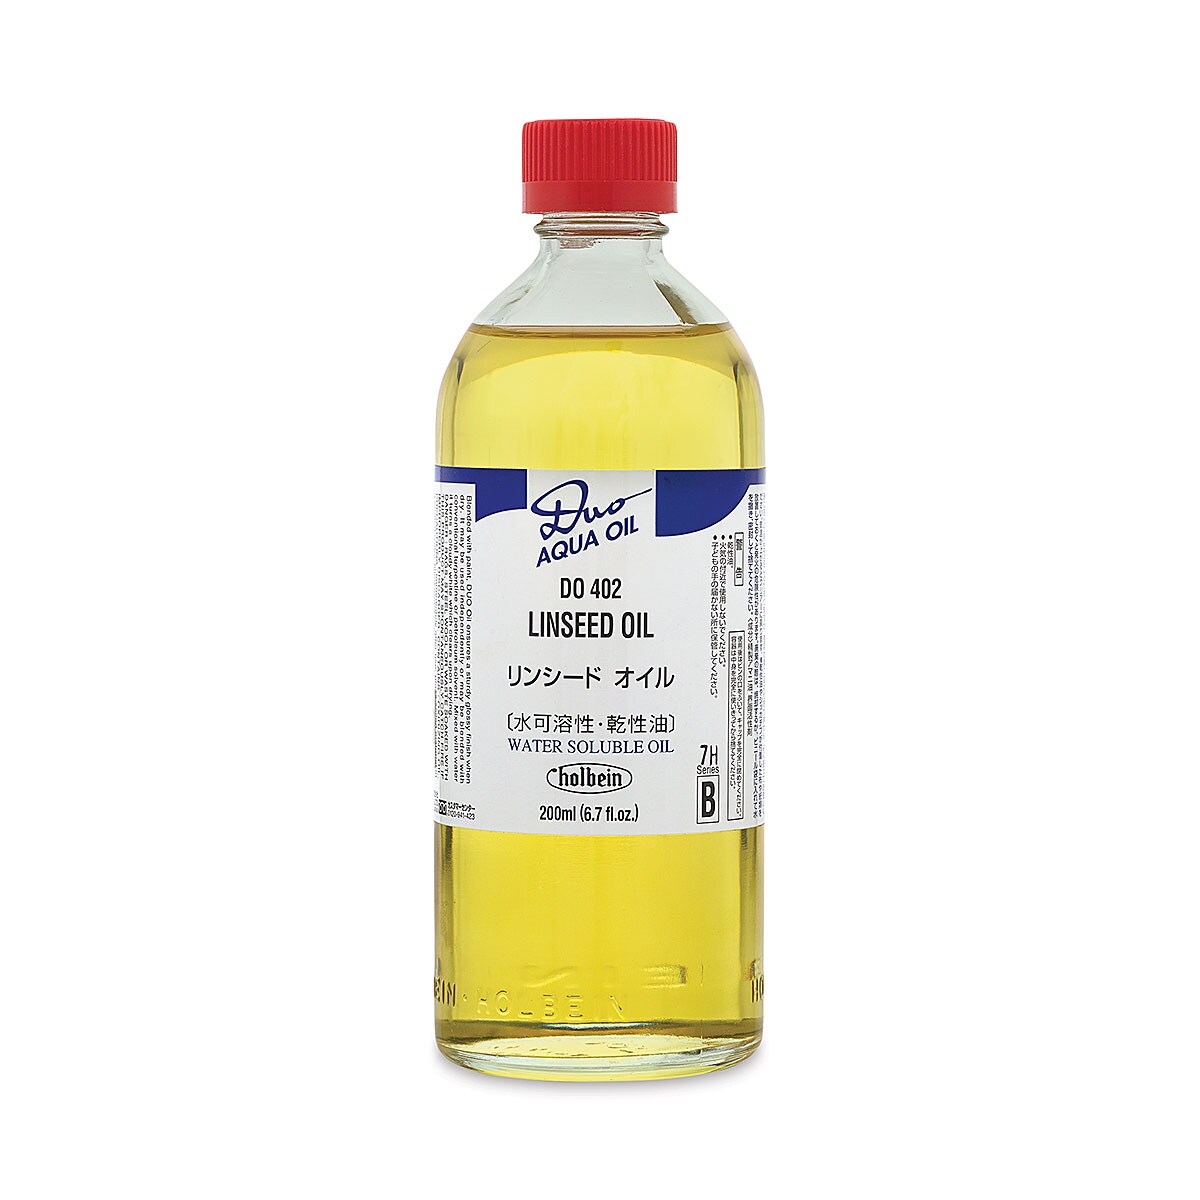 Holbein Duo Aqua Linseed Oil - 200 ml bottle